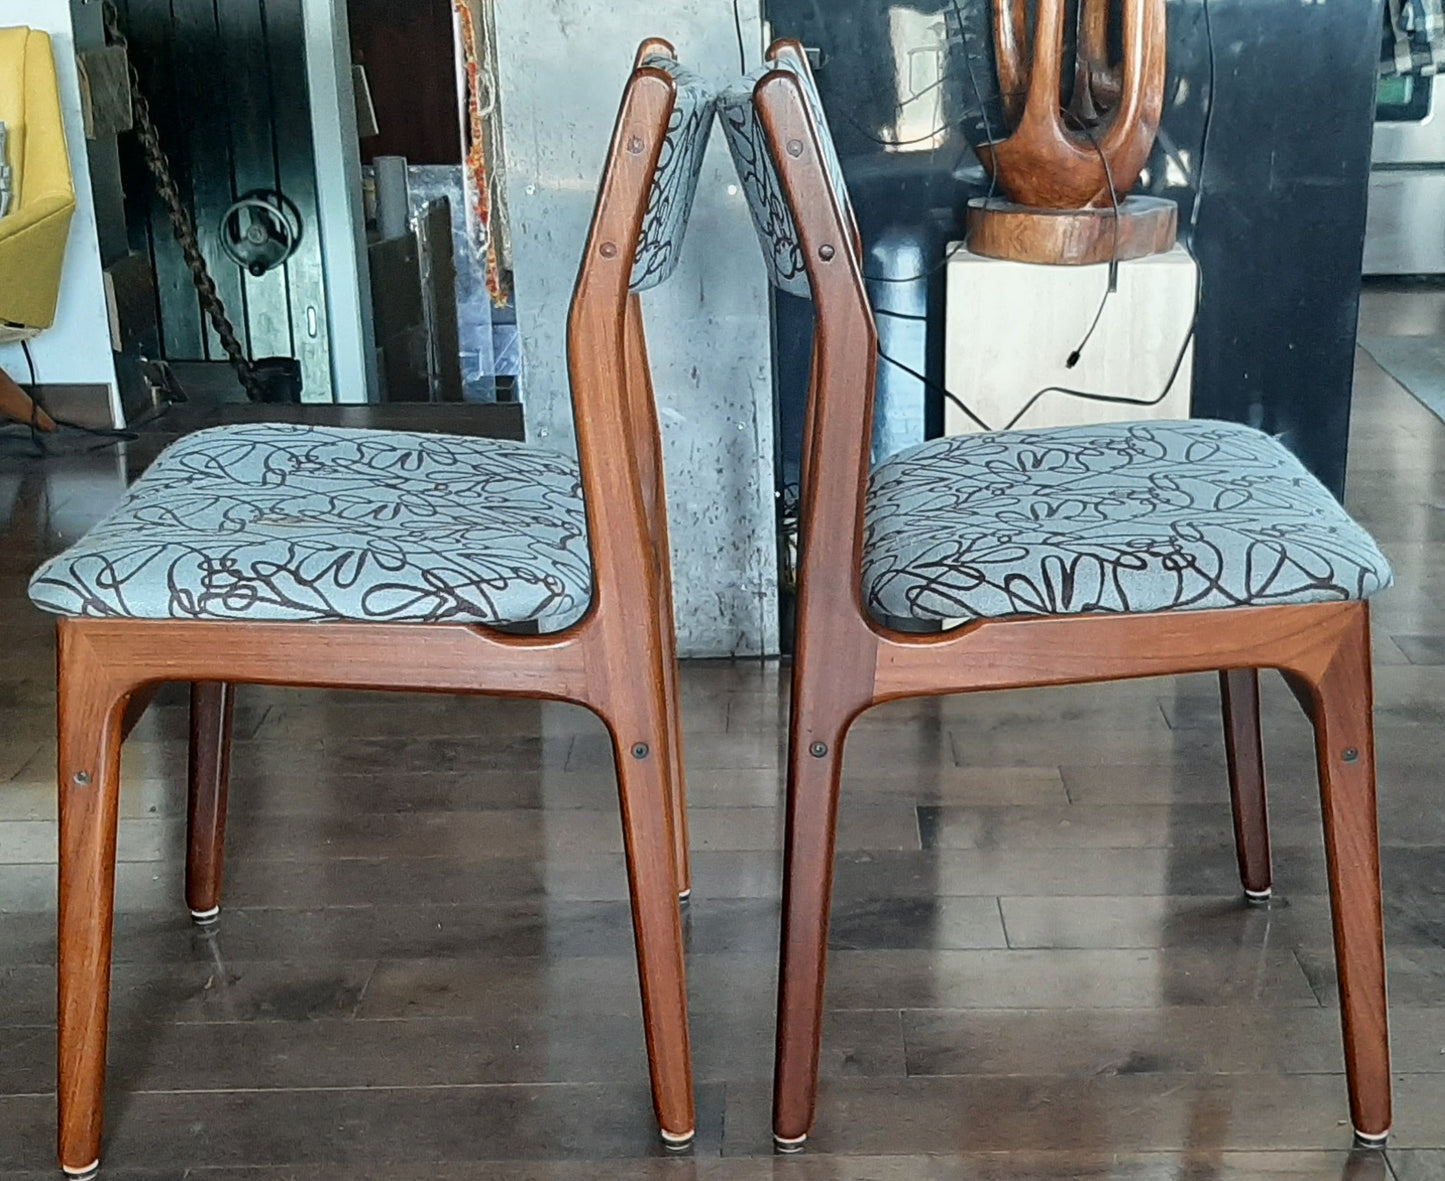 4 REFINISHED Danish MCM Teak Dining Chairs, ready for new upholstery